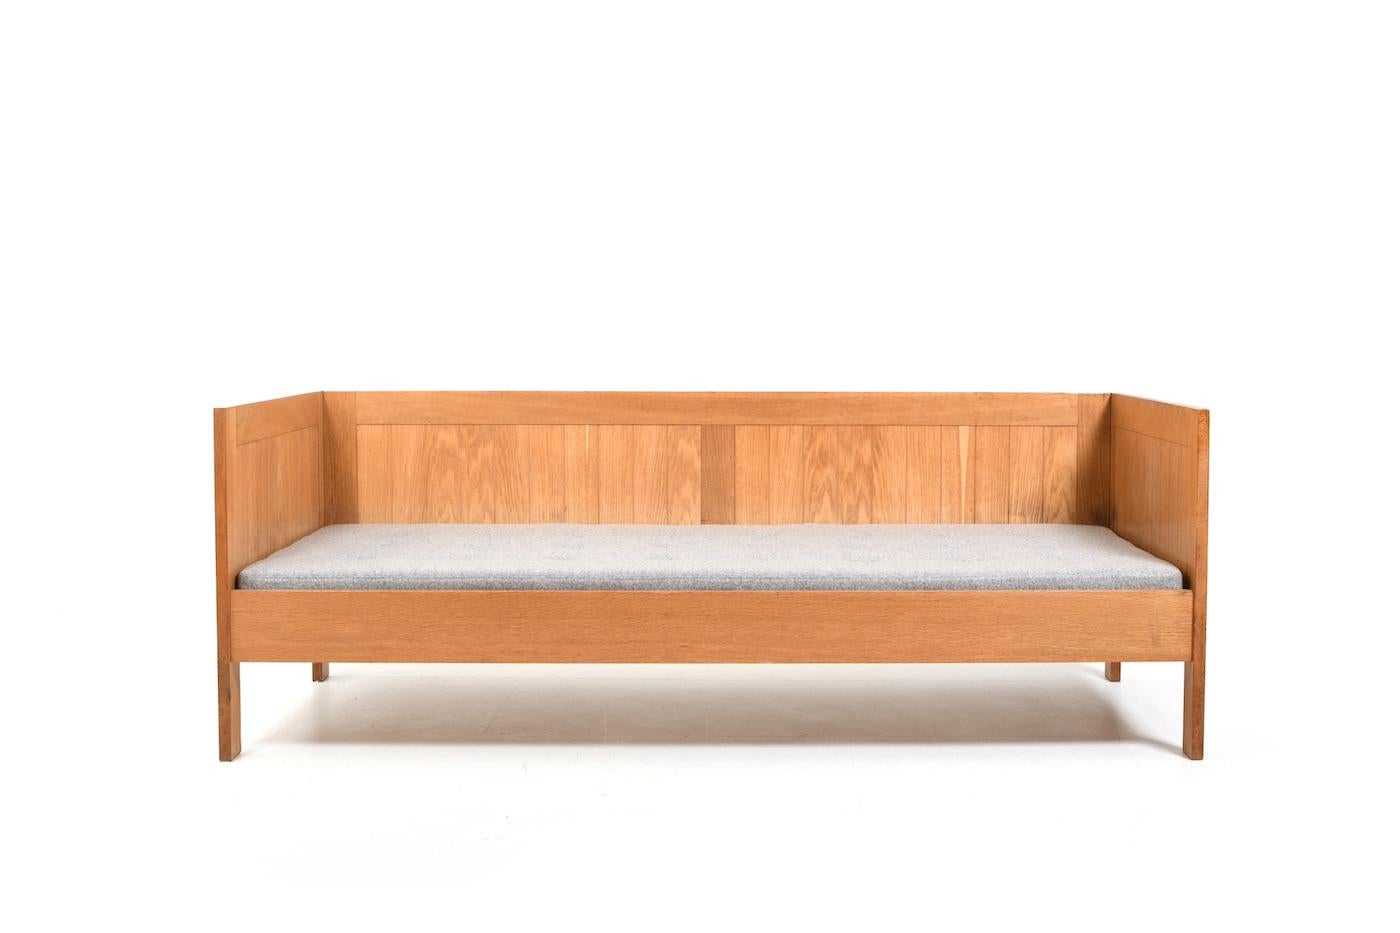 Danish box sofa / daybed with new mattress and new grey wool fabric. Made in solid oak and produced 1960s. We don’t know who designed it, but looks Børge Mogensen or Kurt Østervig. Very good Danish quality! Daybed can be easyely disassembled.